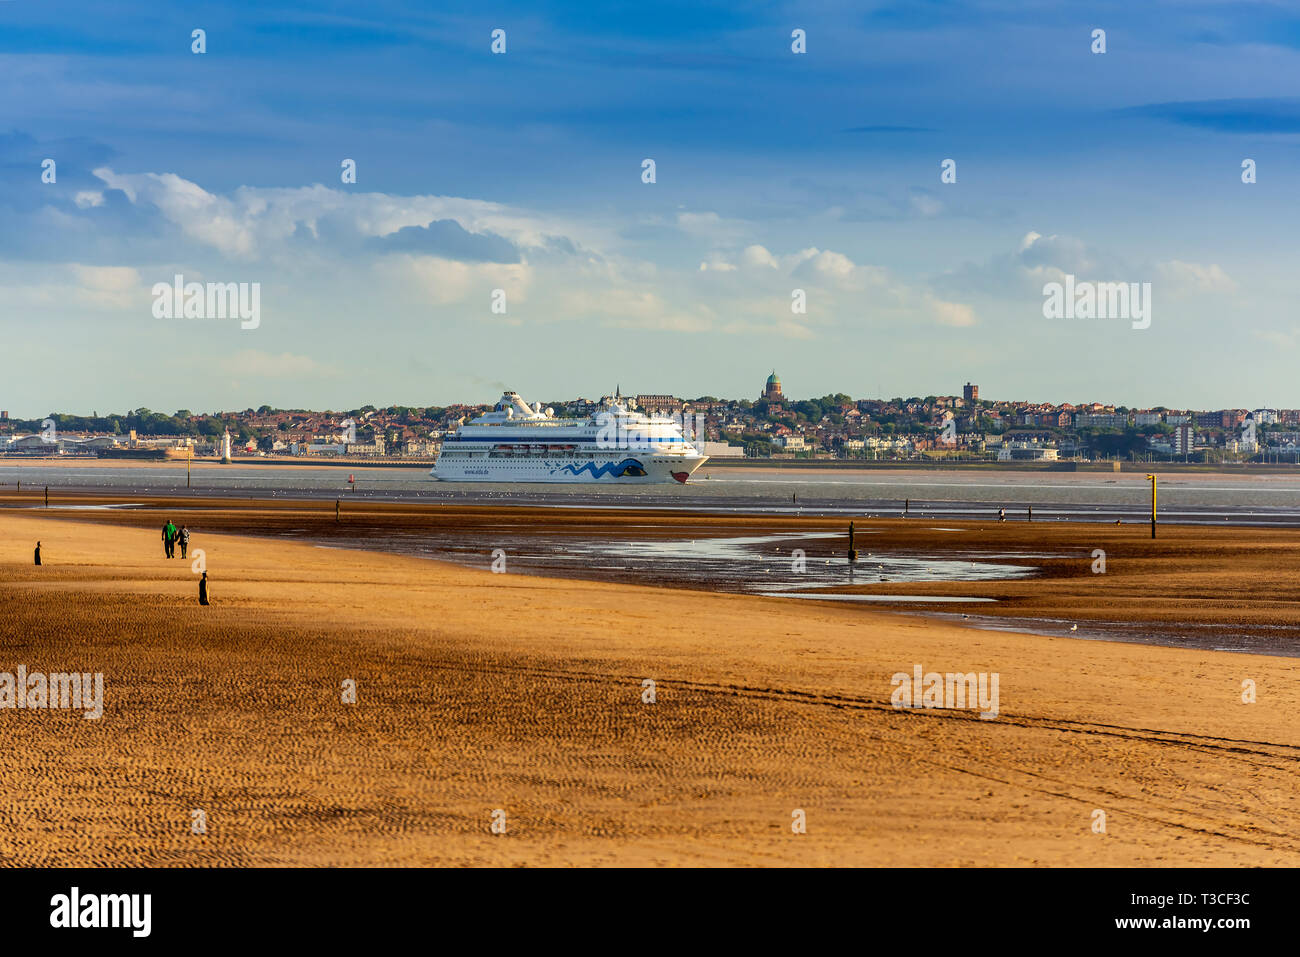 Cruise ship Aida Cara leaves the river Mersey on the evening tide. The town of New Brighton forms the backdrop. Stock Photo